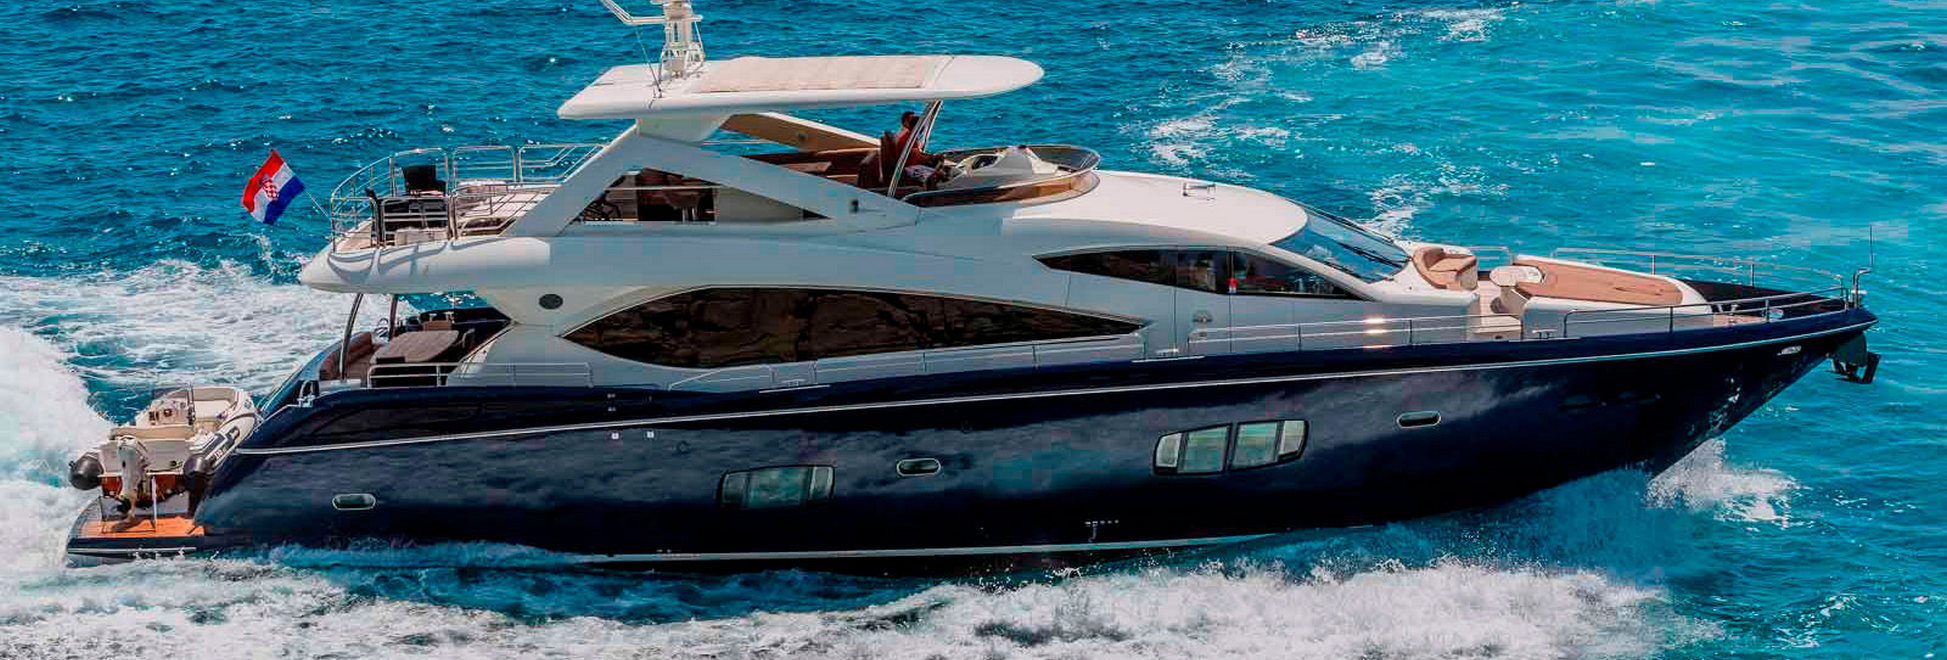 the best way yacht owner